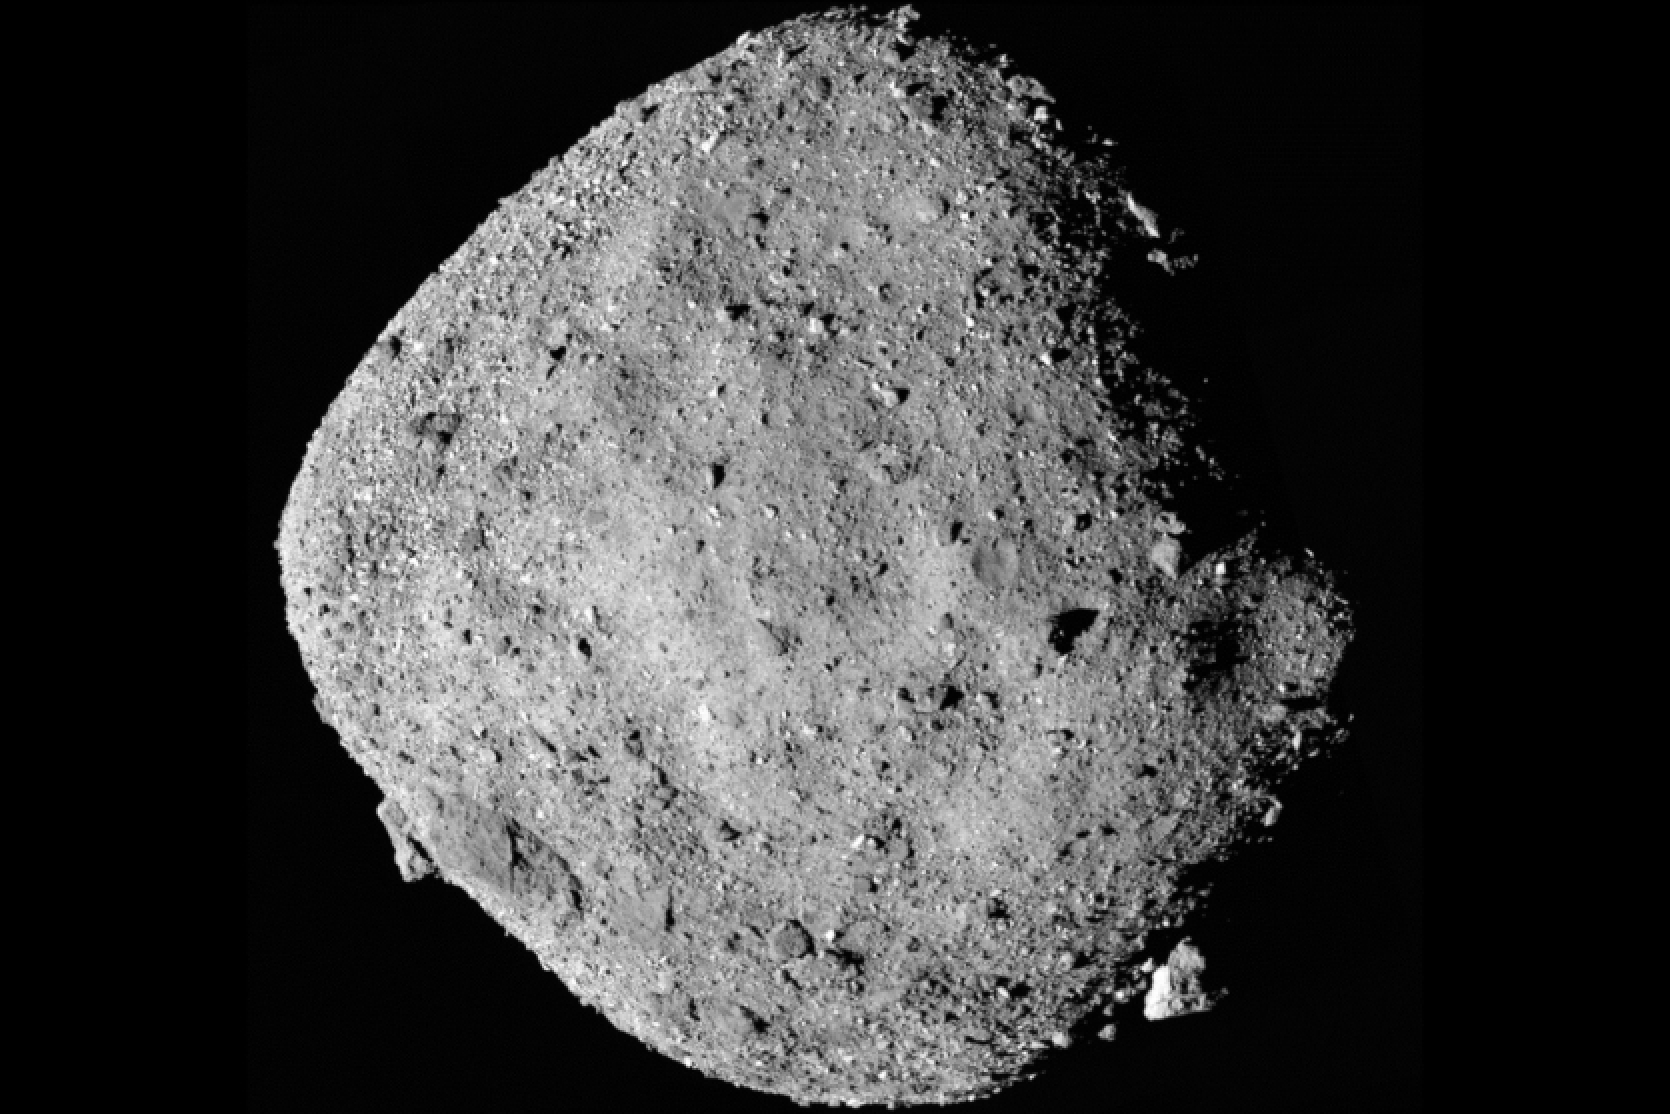 Asteroid Bennu broke away from a small oceanic planet - scientists analyze samples